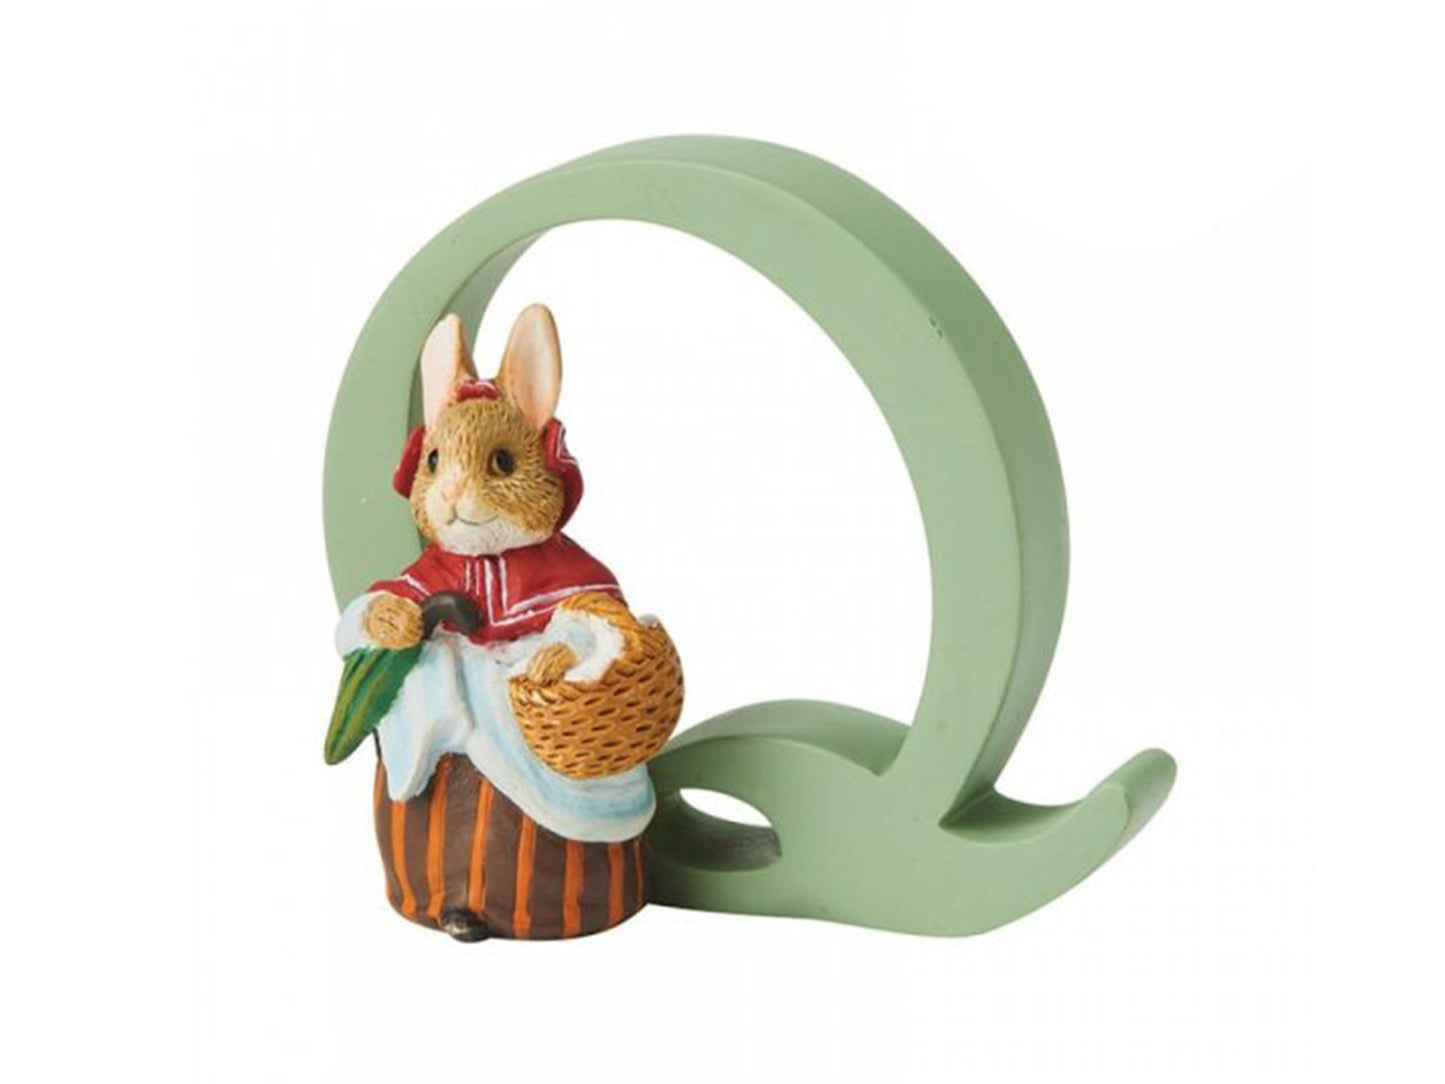 A sage green capital Q with a small brown bunny in front of it, dressed in a striped skirt, white blouse and red hooded shawl. She carries a folded green umbrella and a covered basket.